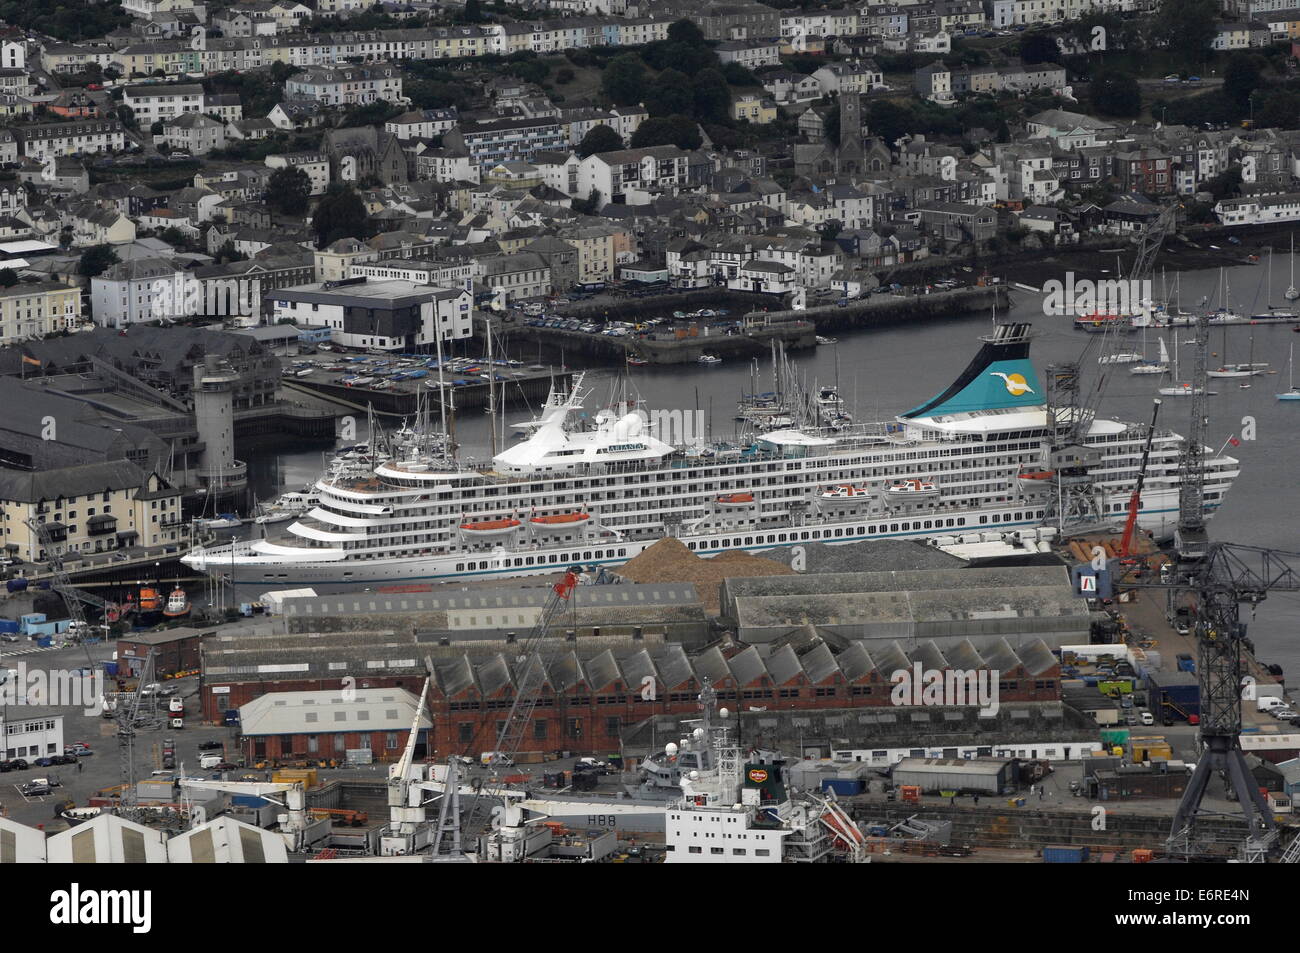 FALMOUTH, ENGLAND. -AERIAL VIEW - THE ENCLOSED HARBOUR SHIP DOCKS WITH THE LINER ARIANIA. PHOTO:JONATHAN EASTLAND/AJAX Stock Photo